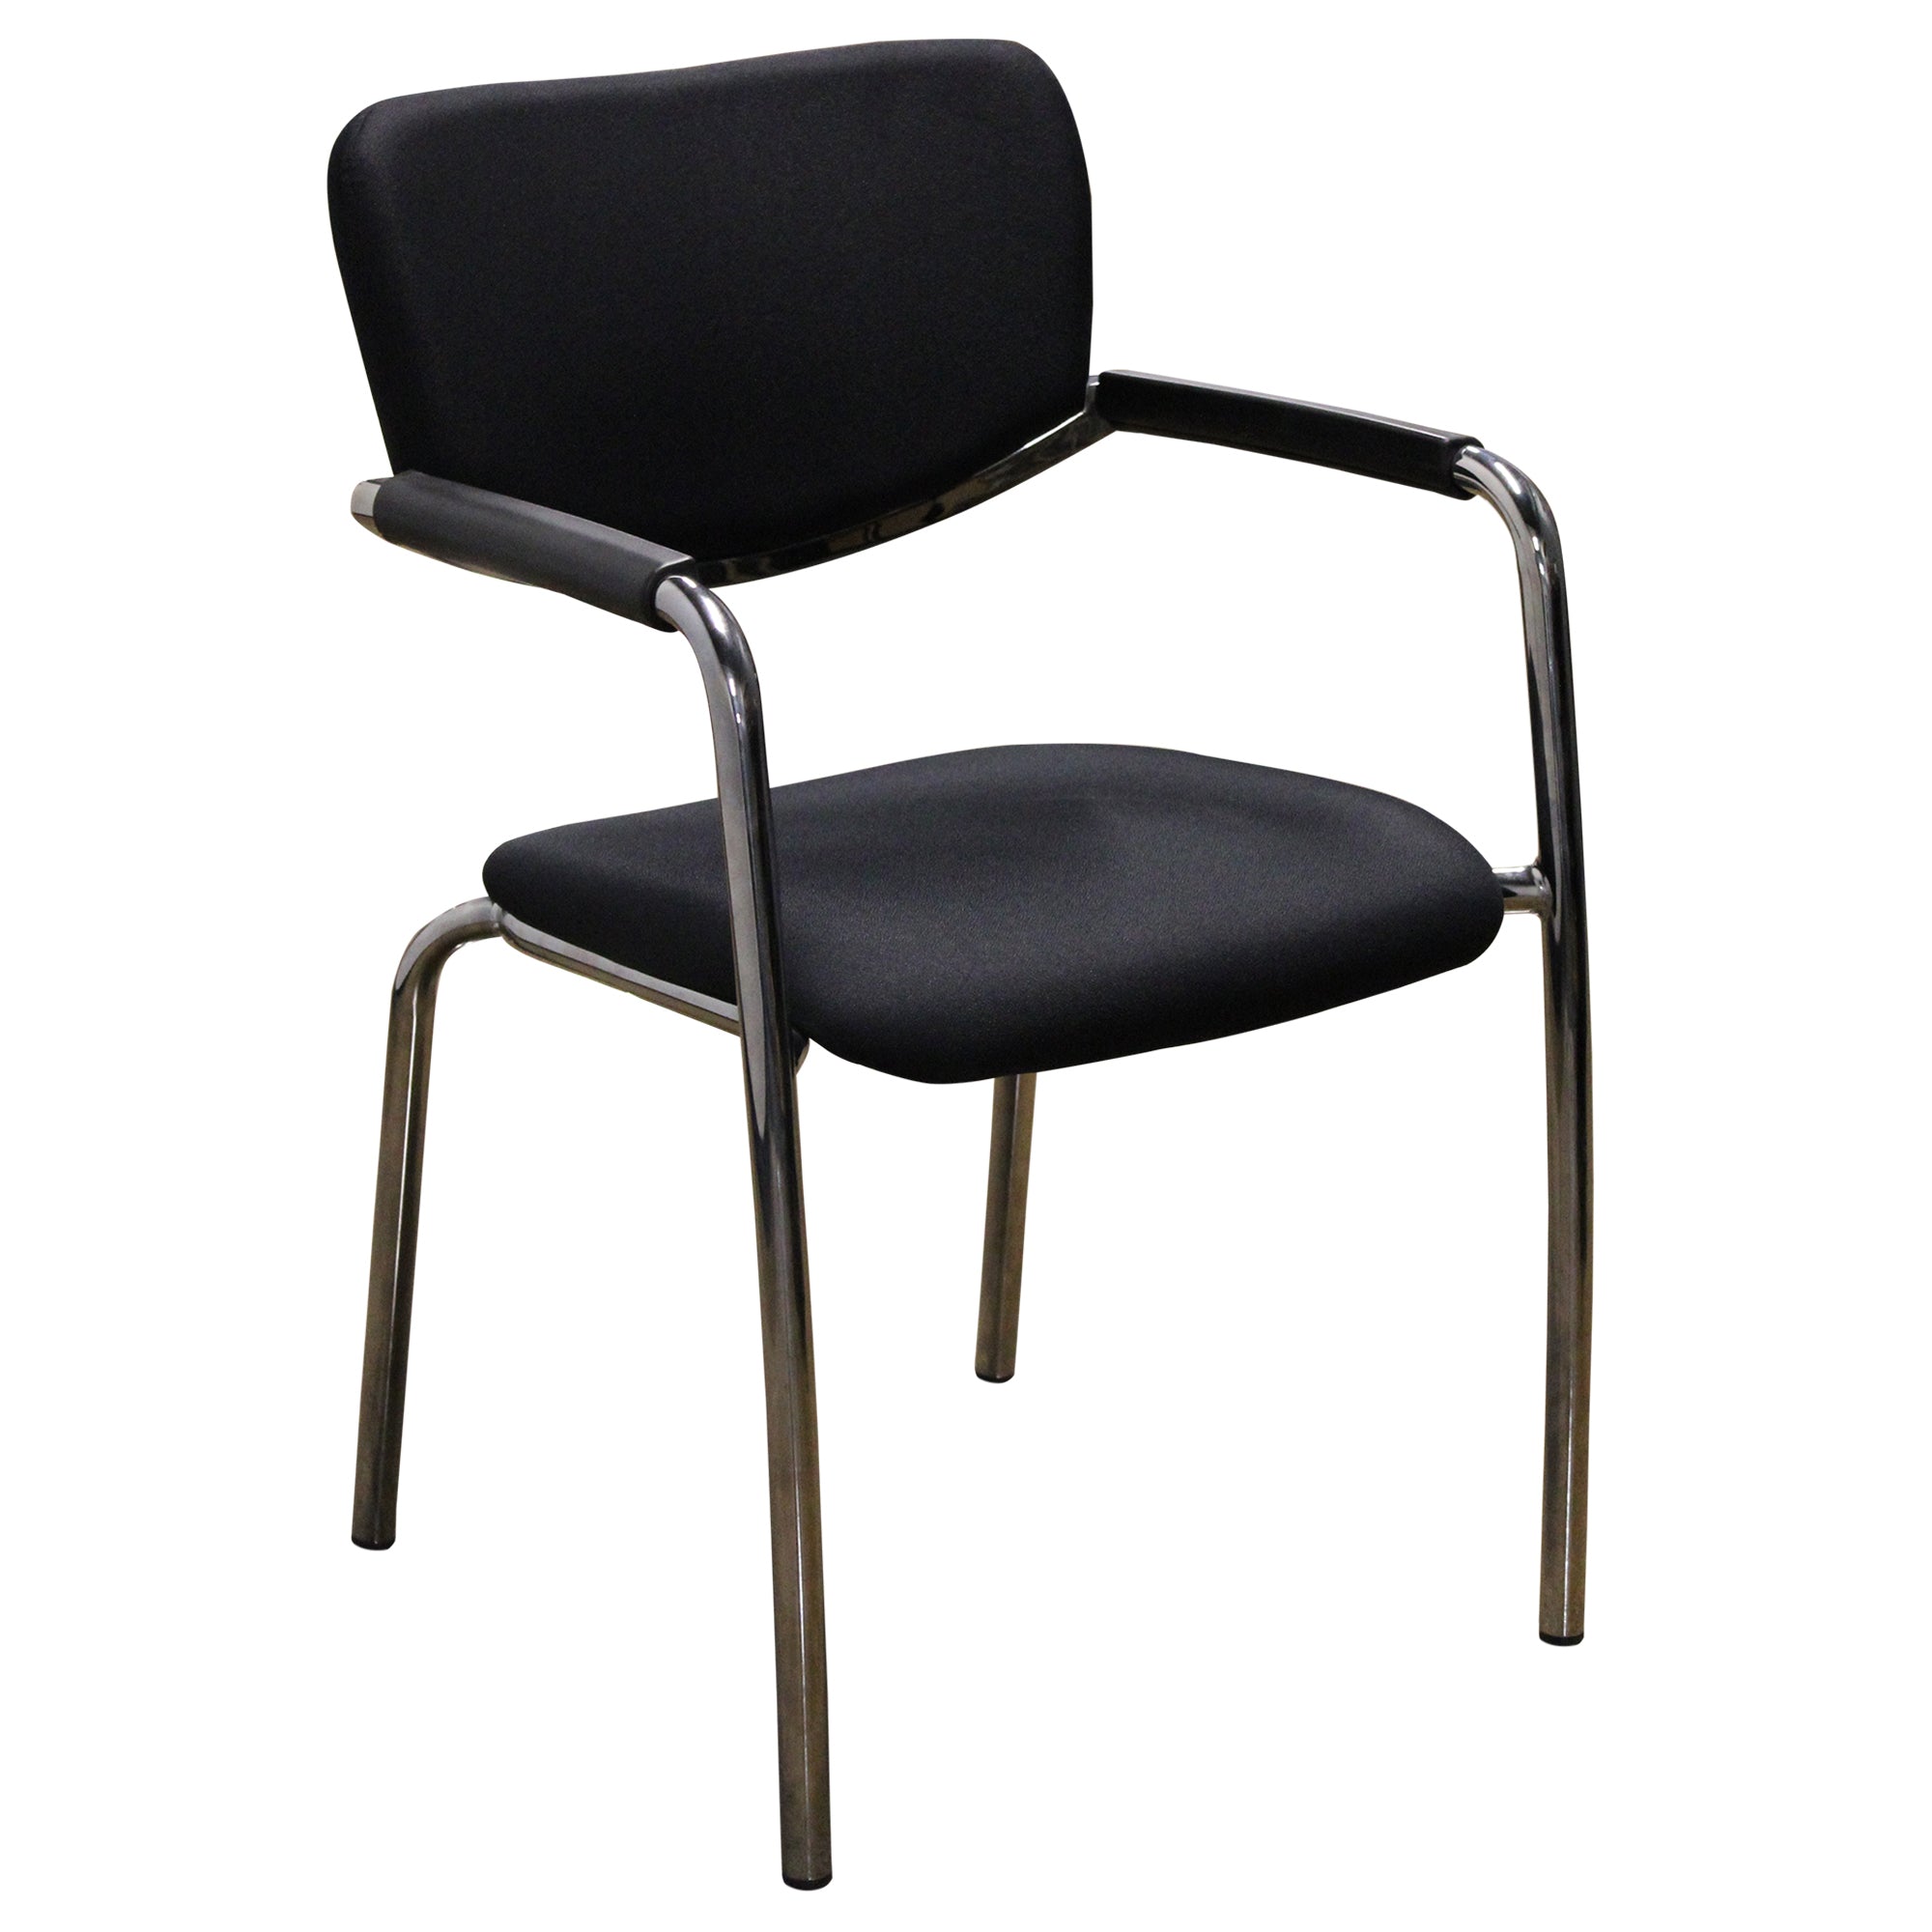 Haworth Zody Guest Chair, Black - Preowned